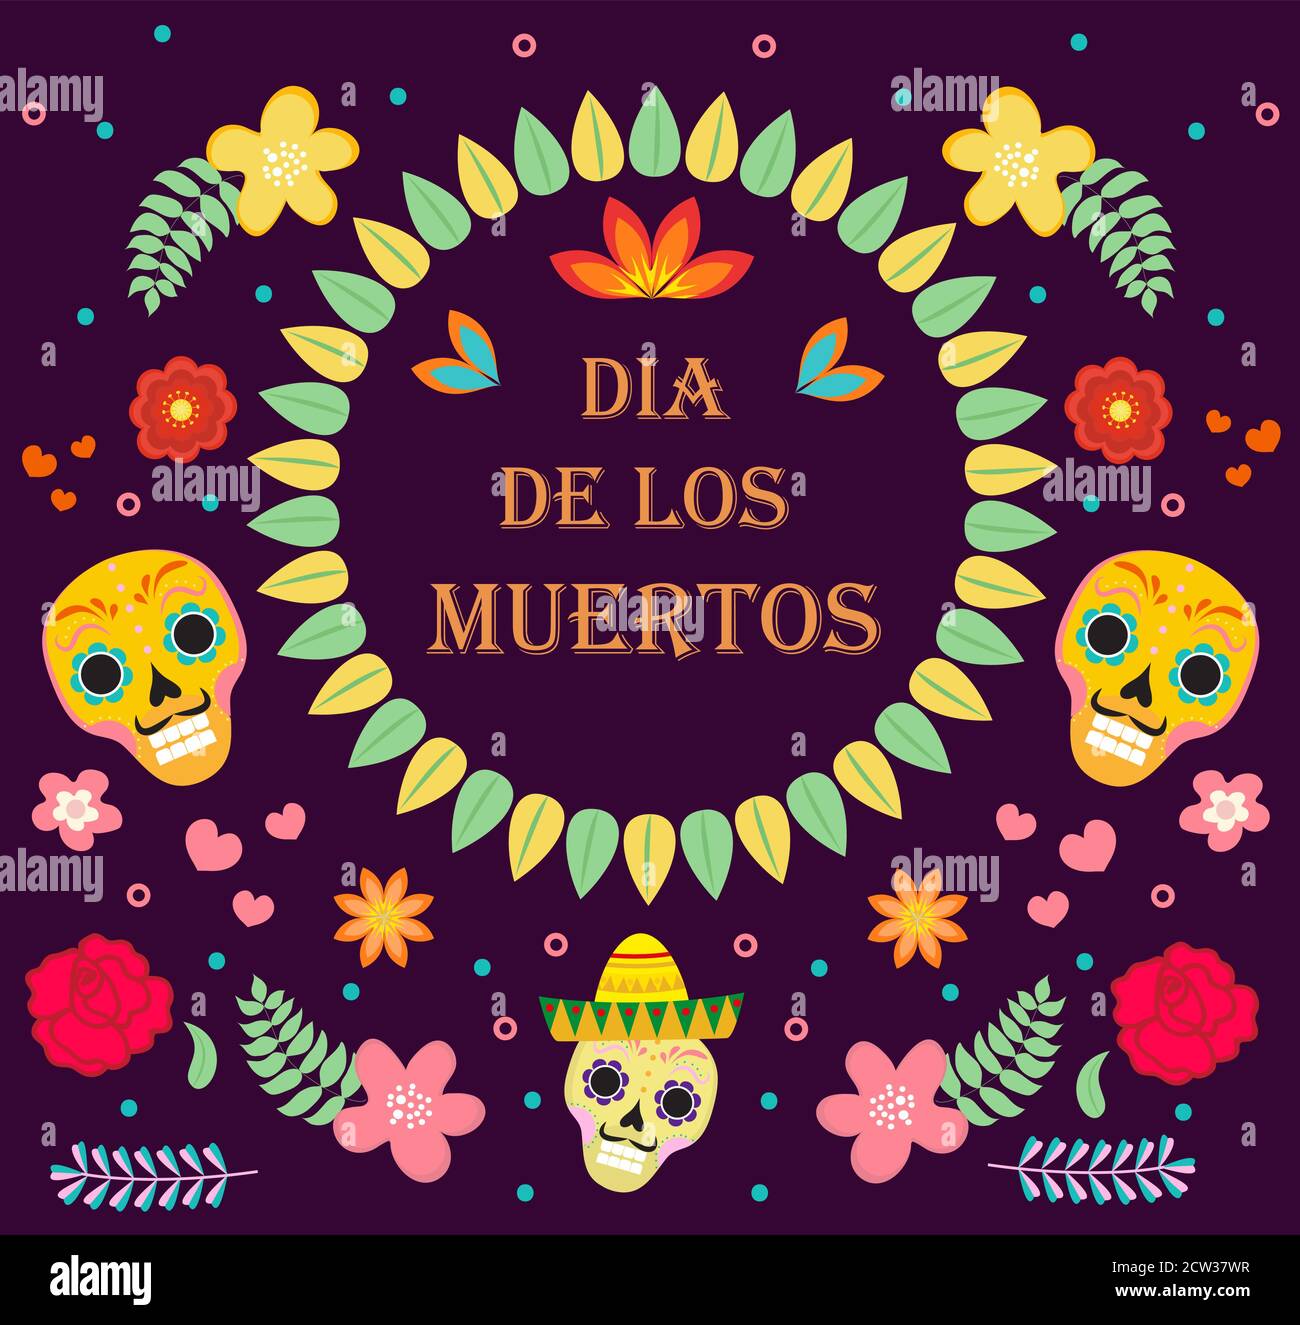 Day of the Dead Mexican holiday icons flat style. Dia de los muertos collection of objects, design elements with sugar skull, skeleton, flowers Stock Vector